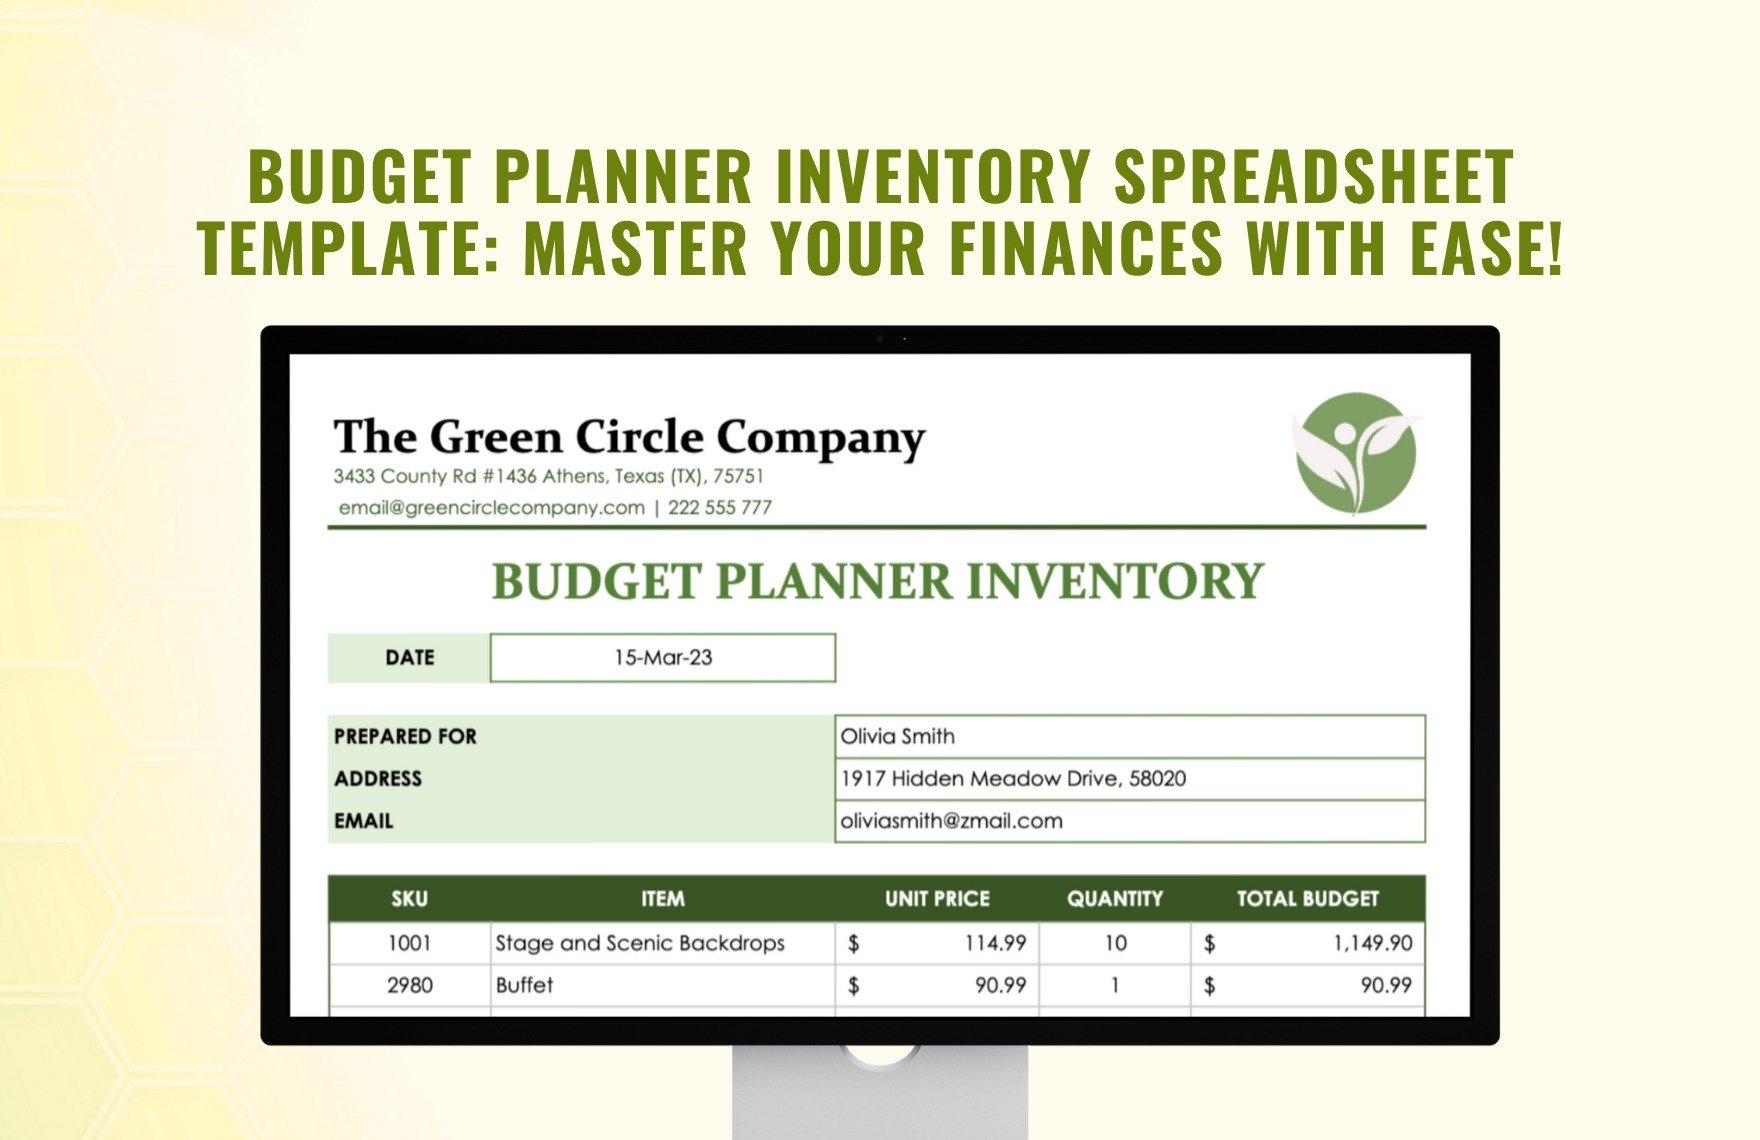 Budget Planner Inventory Spreadsheet Template